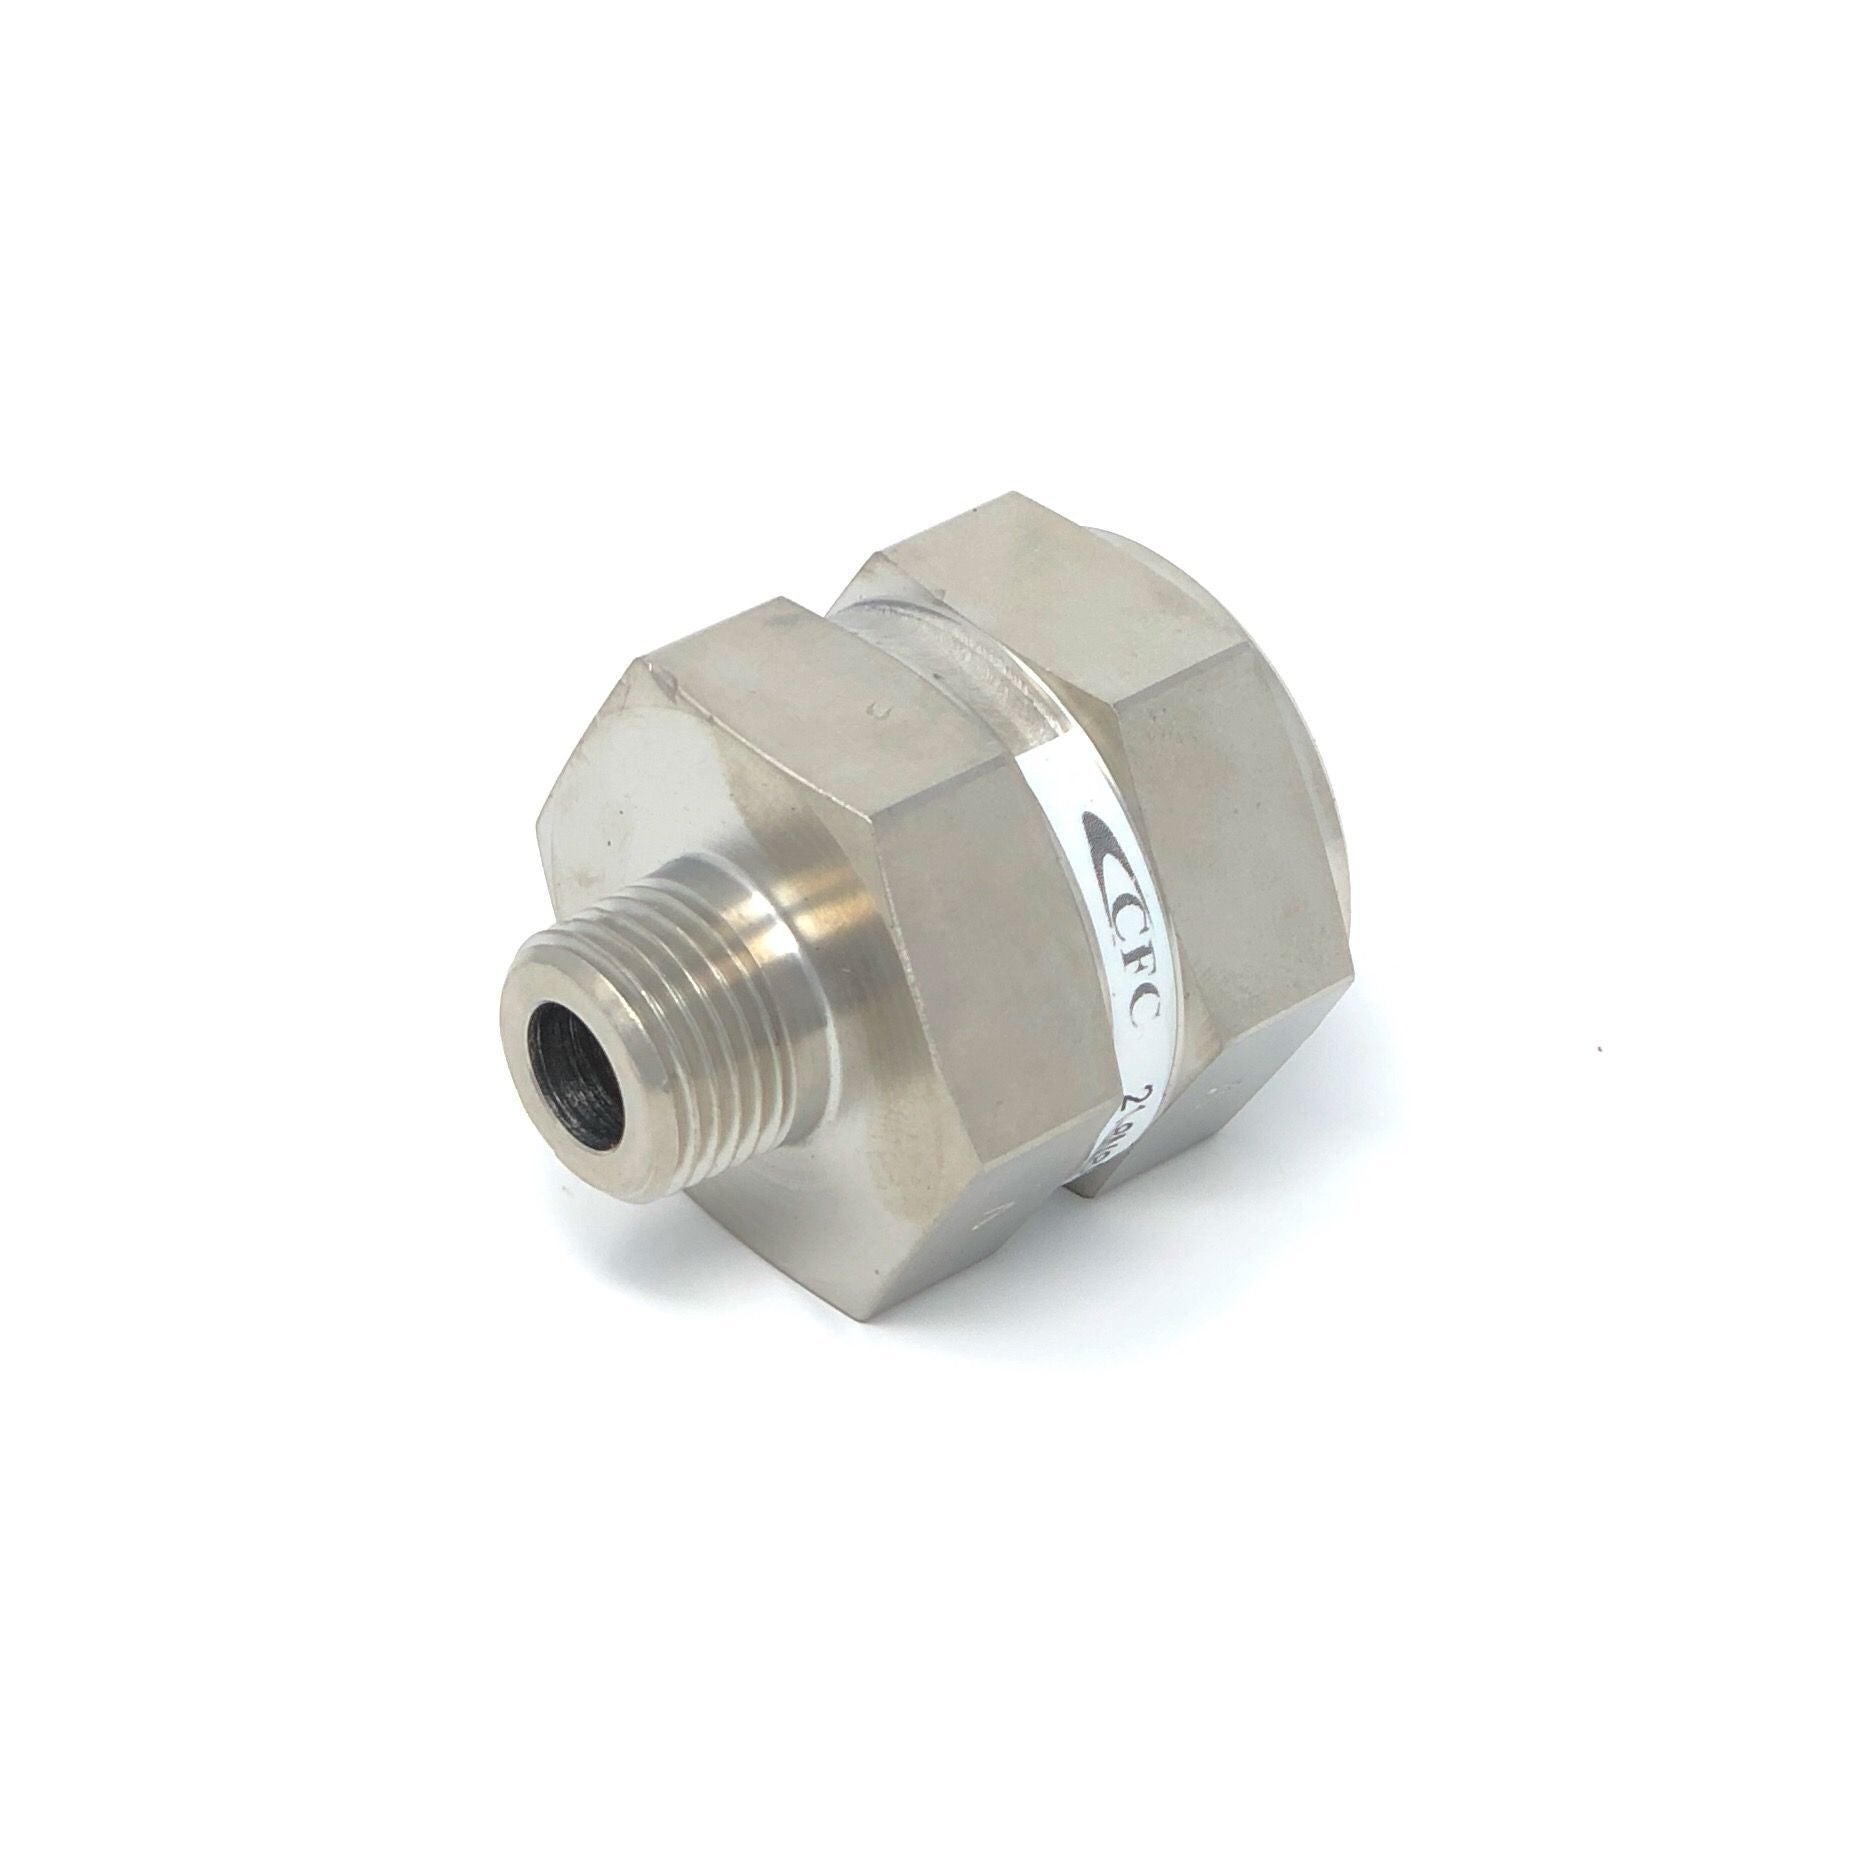 21-6P6P-18S : Chase High Pressure Inline Filter, 6000psi, 3/8" NPT, 18 Micron, No Visual Indicator, No Bypass